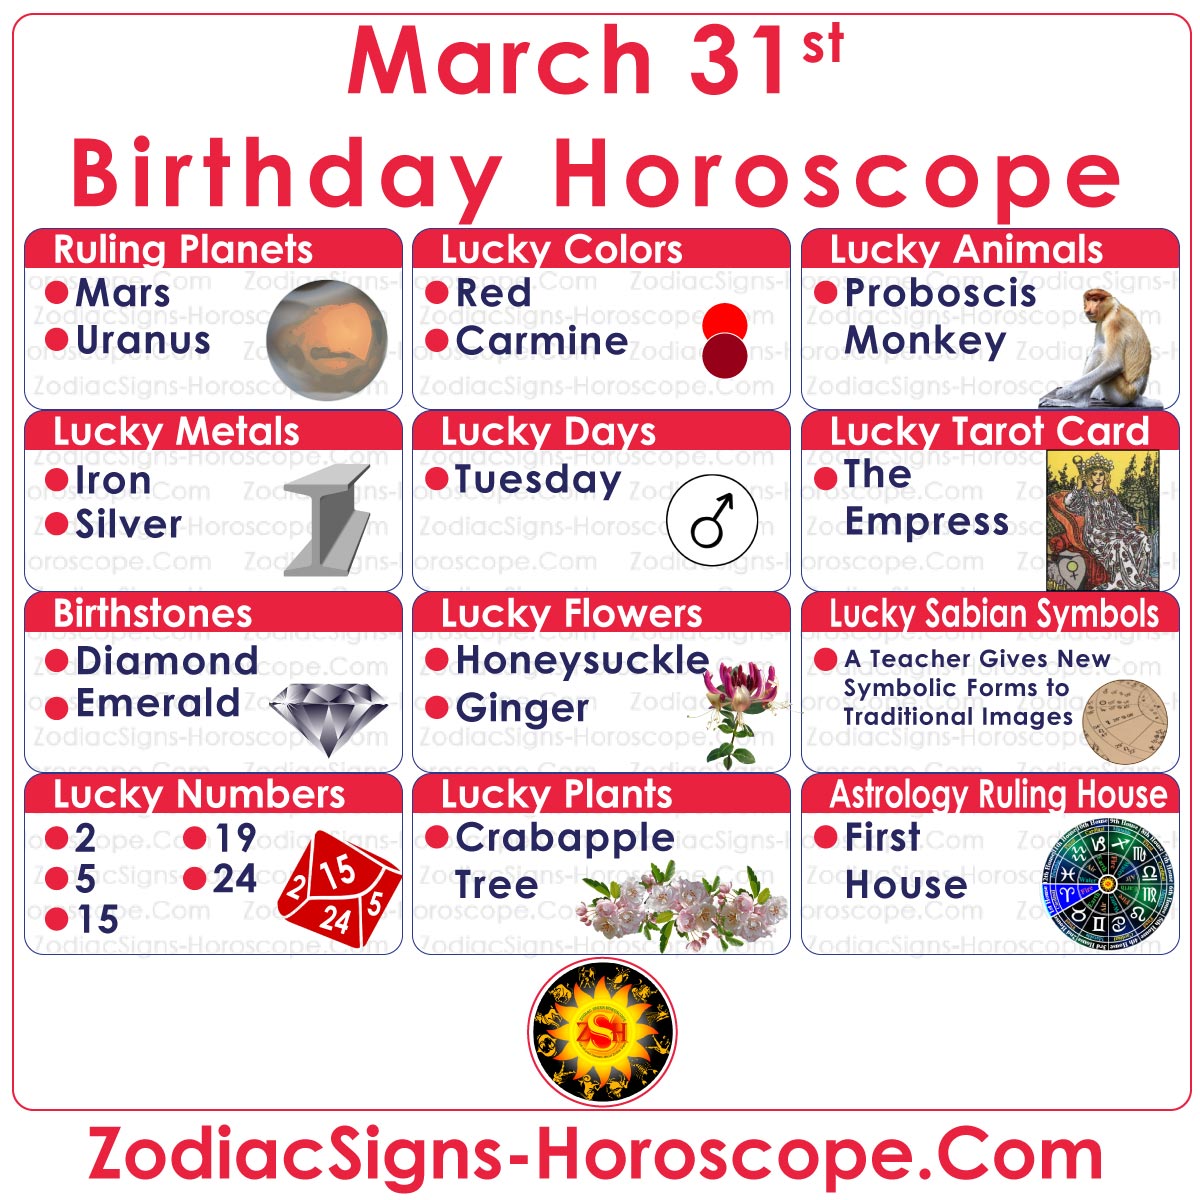 March 31st born Lucky Numbers, Days, Colors and more